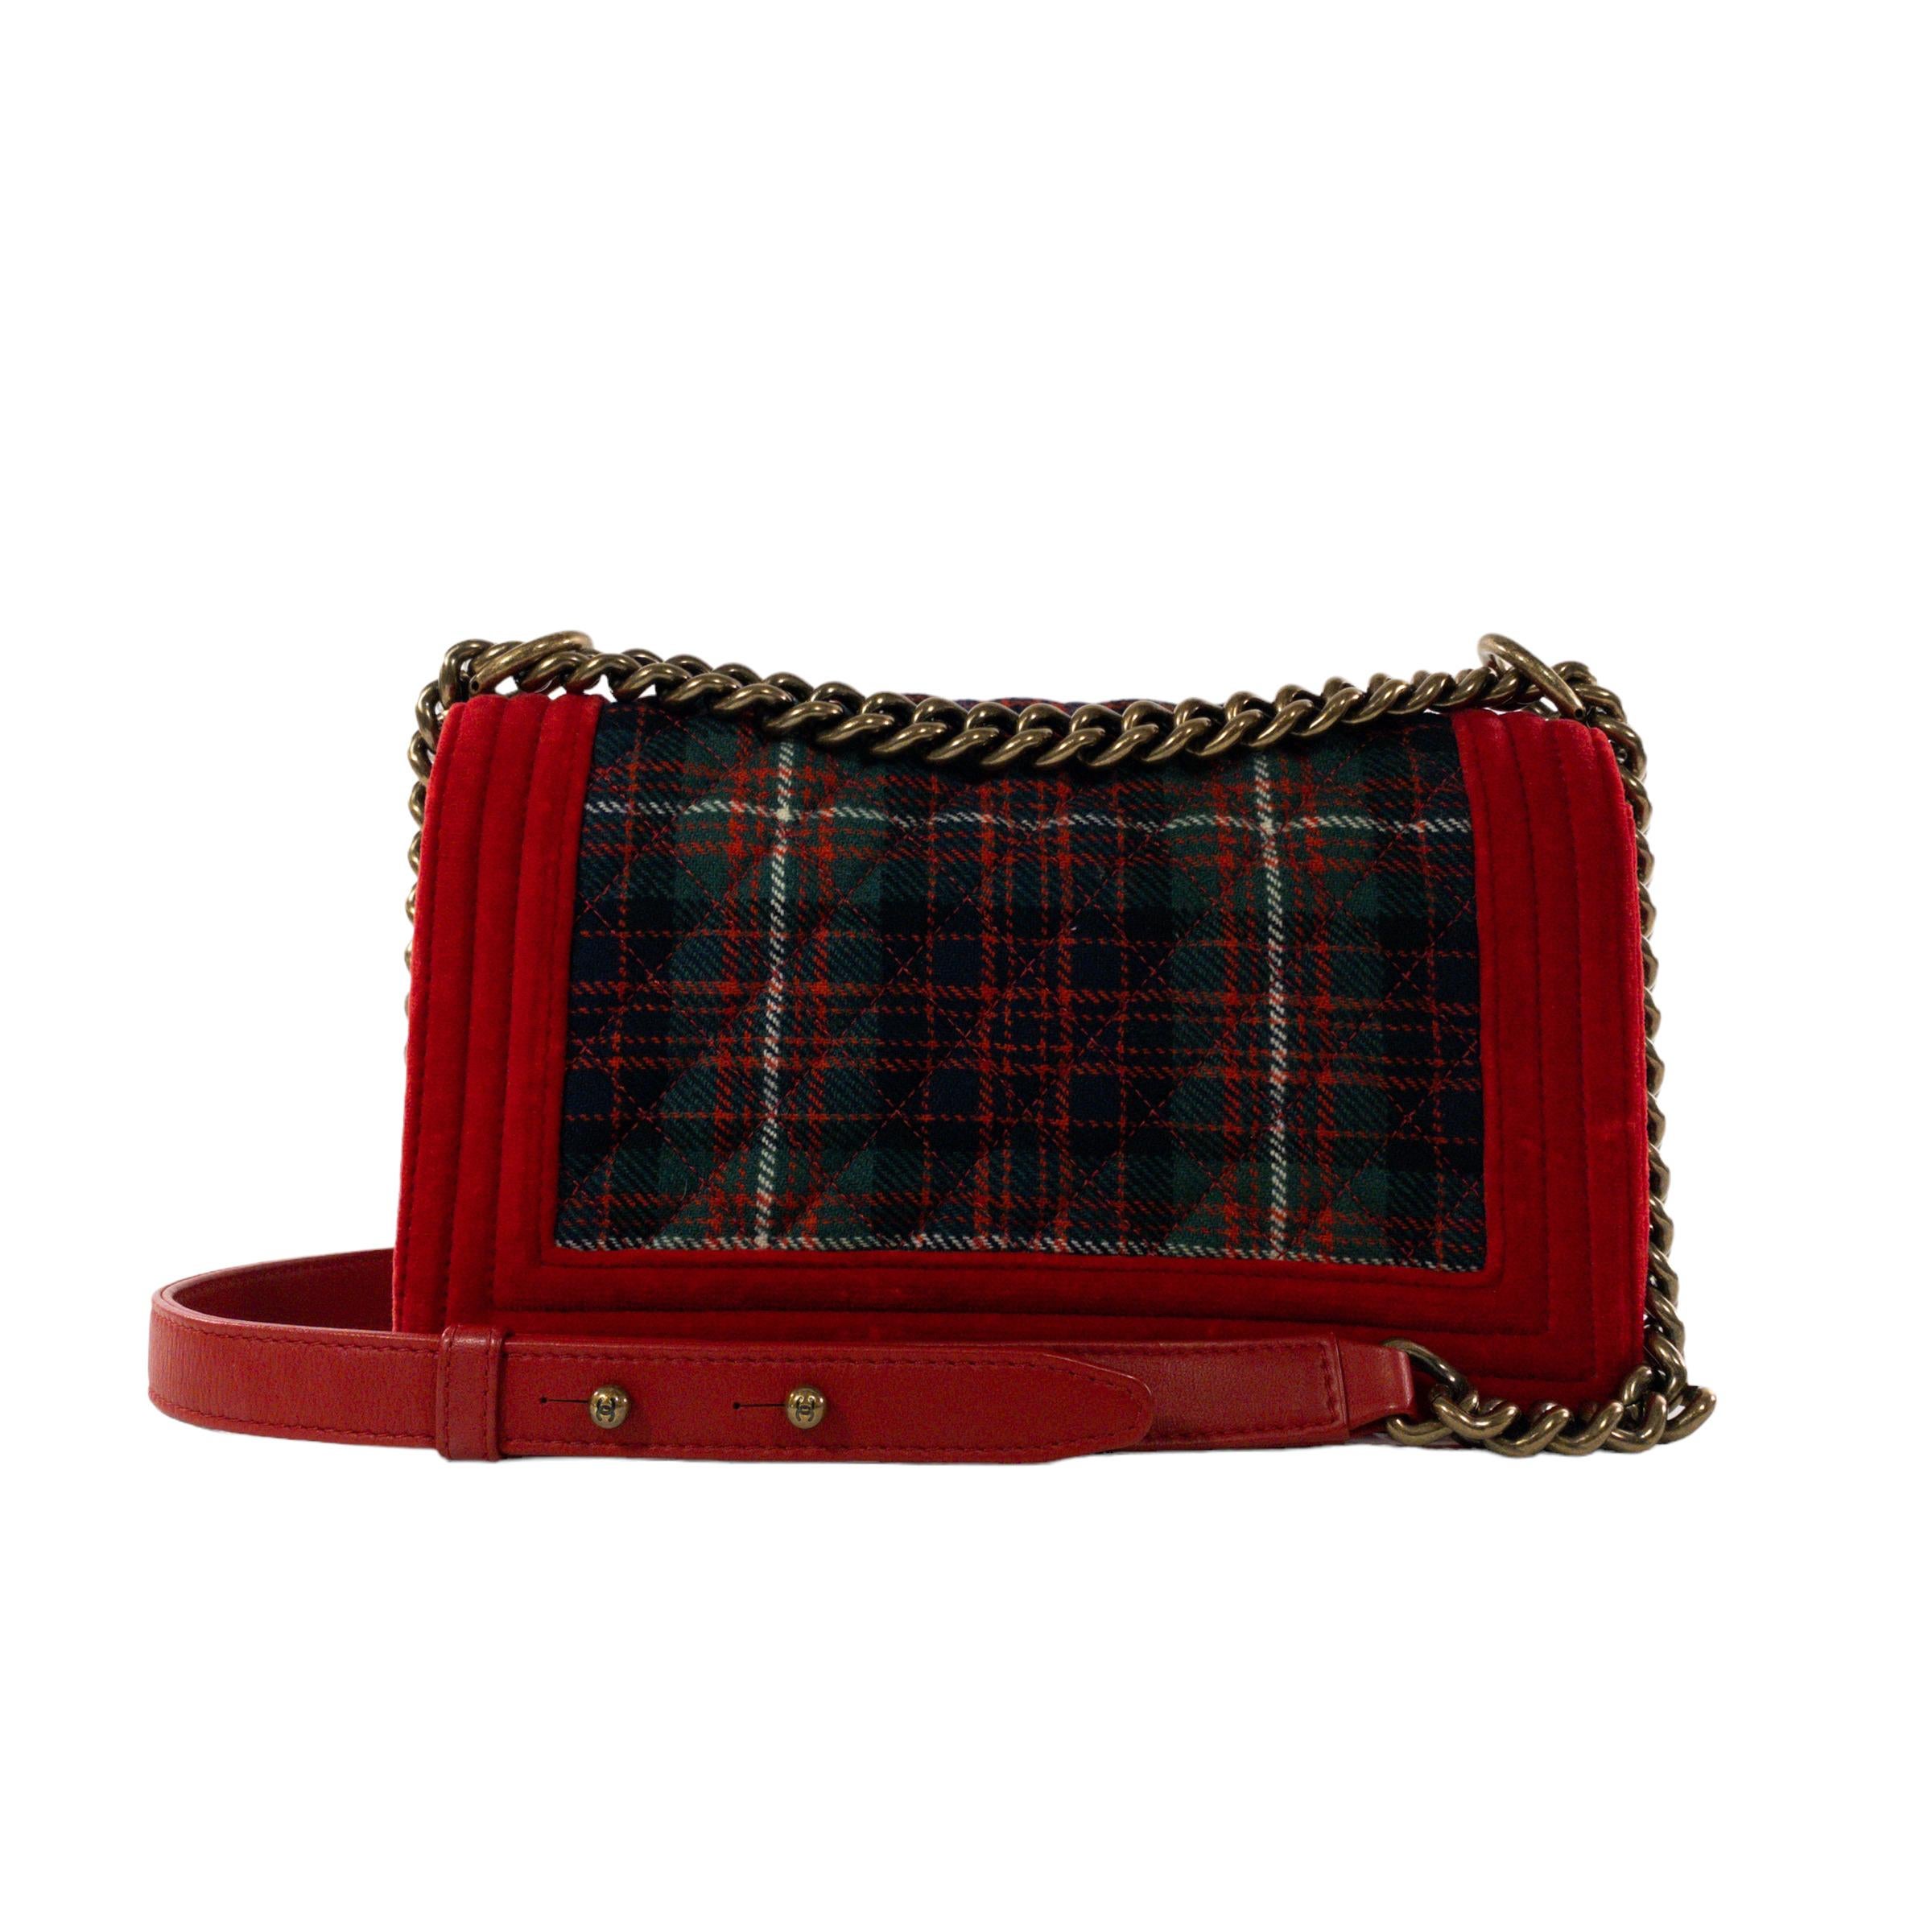 Chanel Paris Edinburgh Boy Old Medium Bag

This is an Authentic Chanel Old Medium Boy bag. Quilted flannel with bright red velvet exterior. Antique brass hardware push lock CC closure on front flap. Large interior compartment with fabric lining.